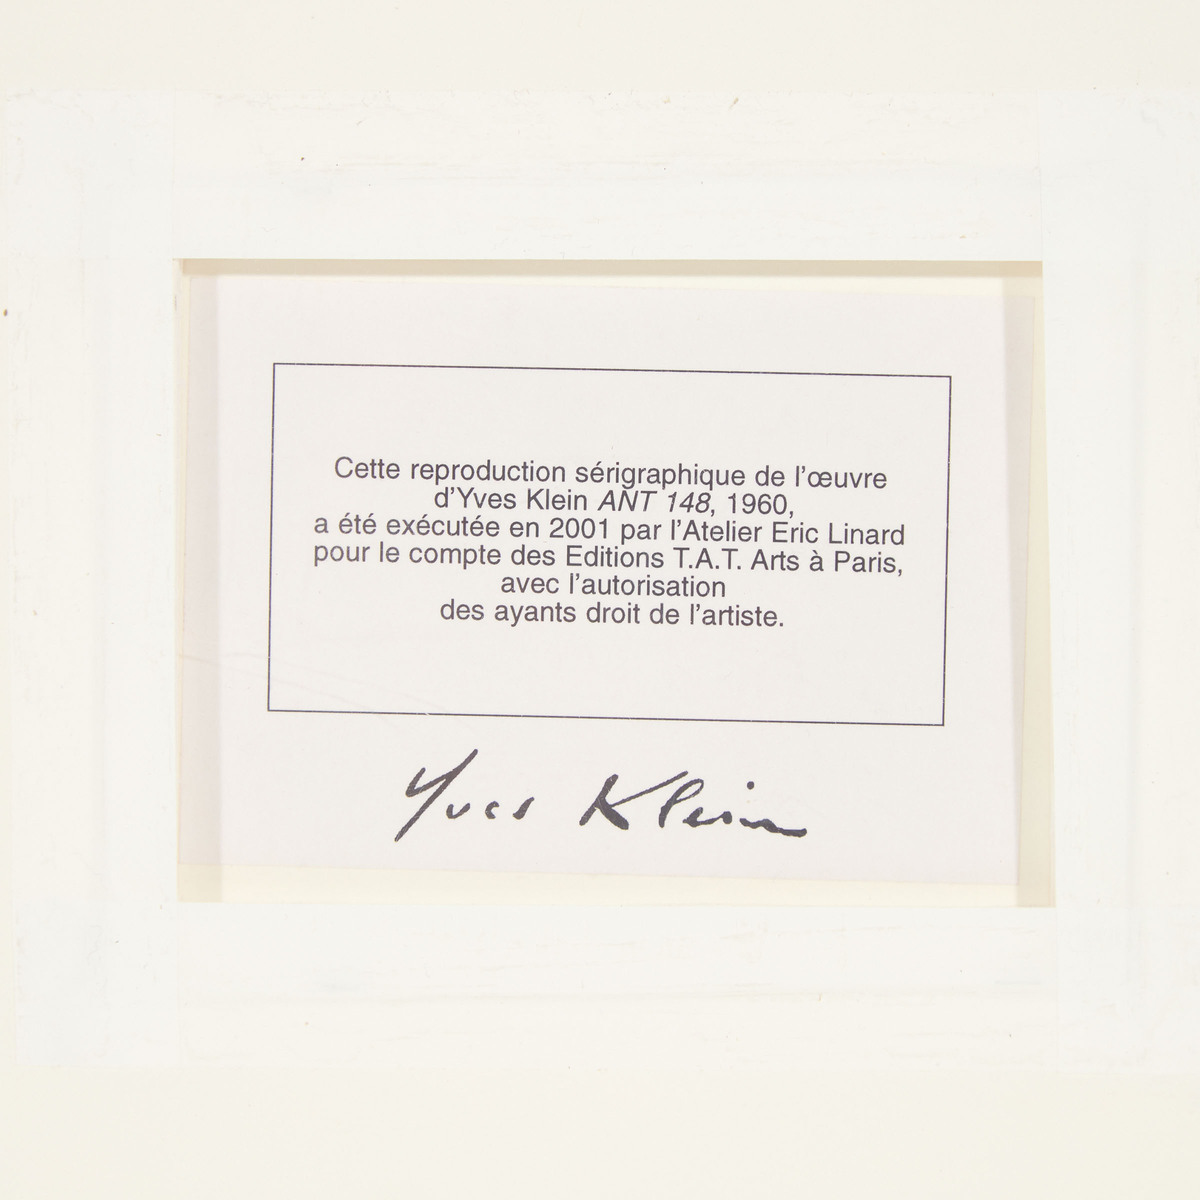 Yves Klein (1928-1962), ANTHROPOMETRIE, ANT 148, 1960-2001, stamp-signed verso, from an edition of 2 - Image 4 of 4